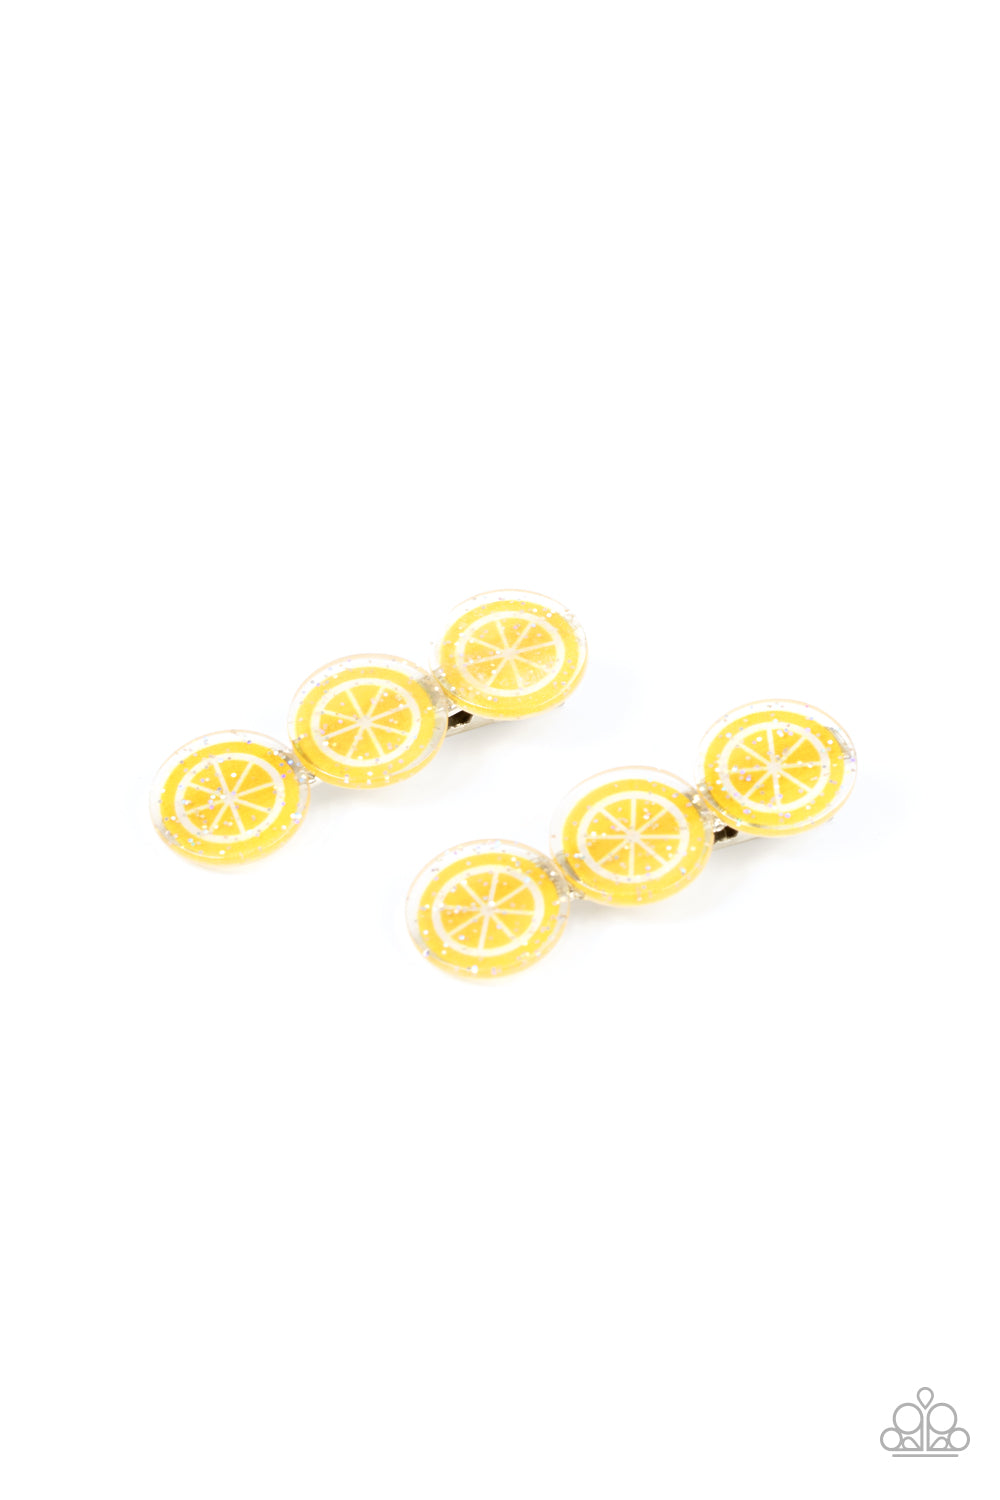 Charismatically Citrus Yellow Hair Clip - Paparazzi Accessories  Sprinkled in sparkle, a zesty trio of lemon frames coalesce into a citrusy pair of hair clips. Features standard hair clips on the back.  Sold as one pair of hair clips.